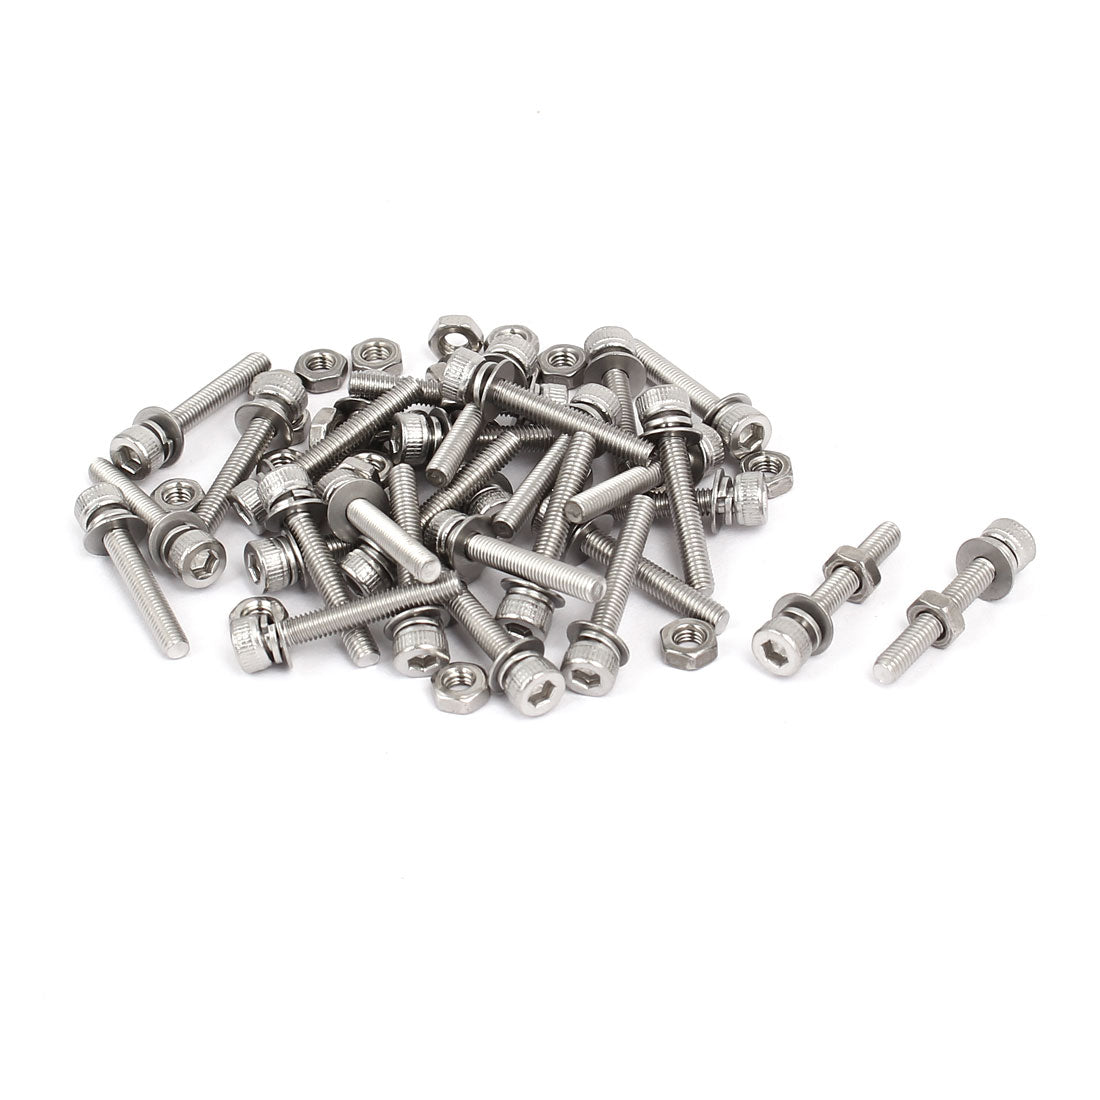 uxcell Uxcell M3 x 20mm 304 Stainless Steel Hex Socket Head Cap Screws Nuts w Washers 30 Sets